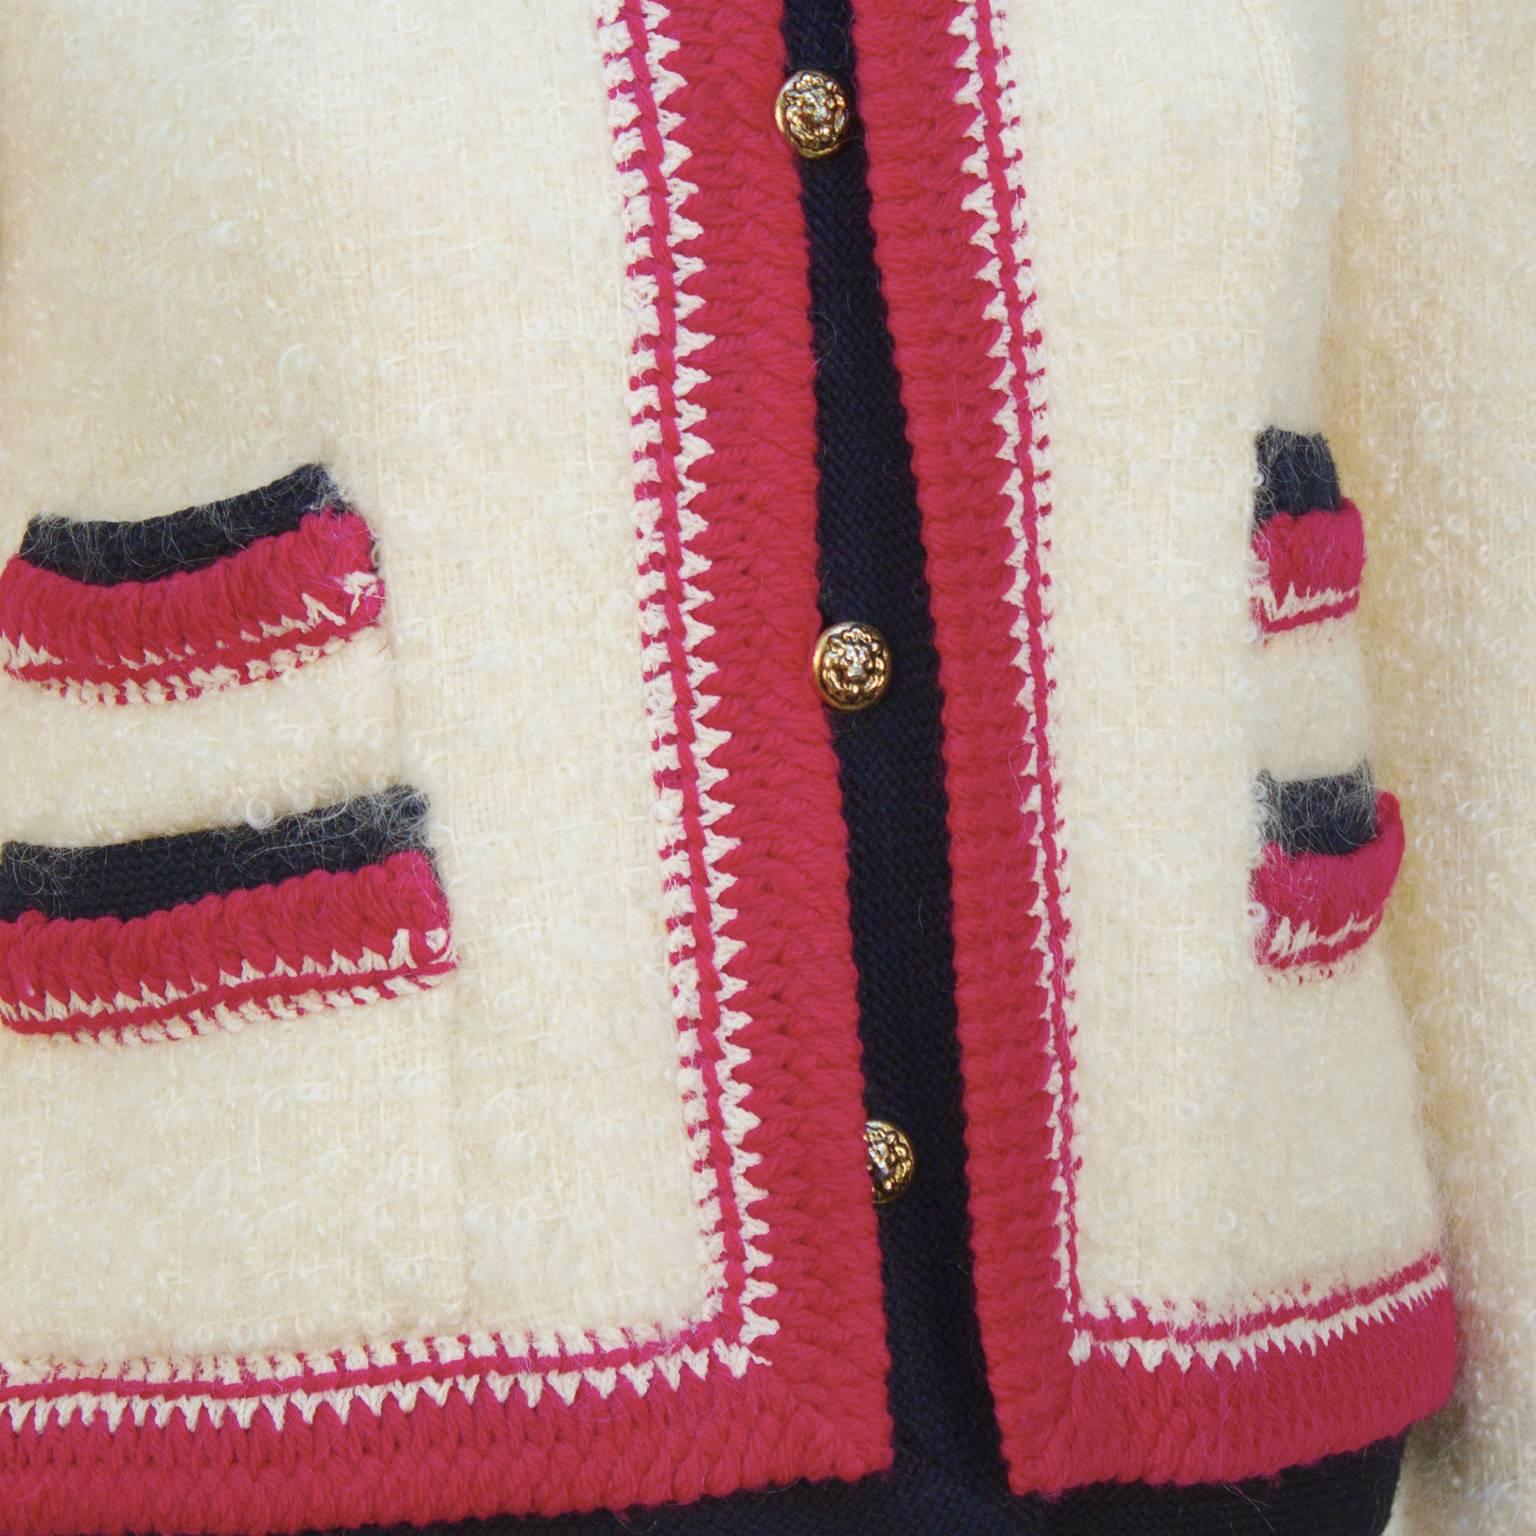 Women's 1980's Chanel Cream Boucle Jacket with Colorful Trim